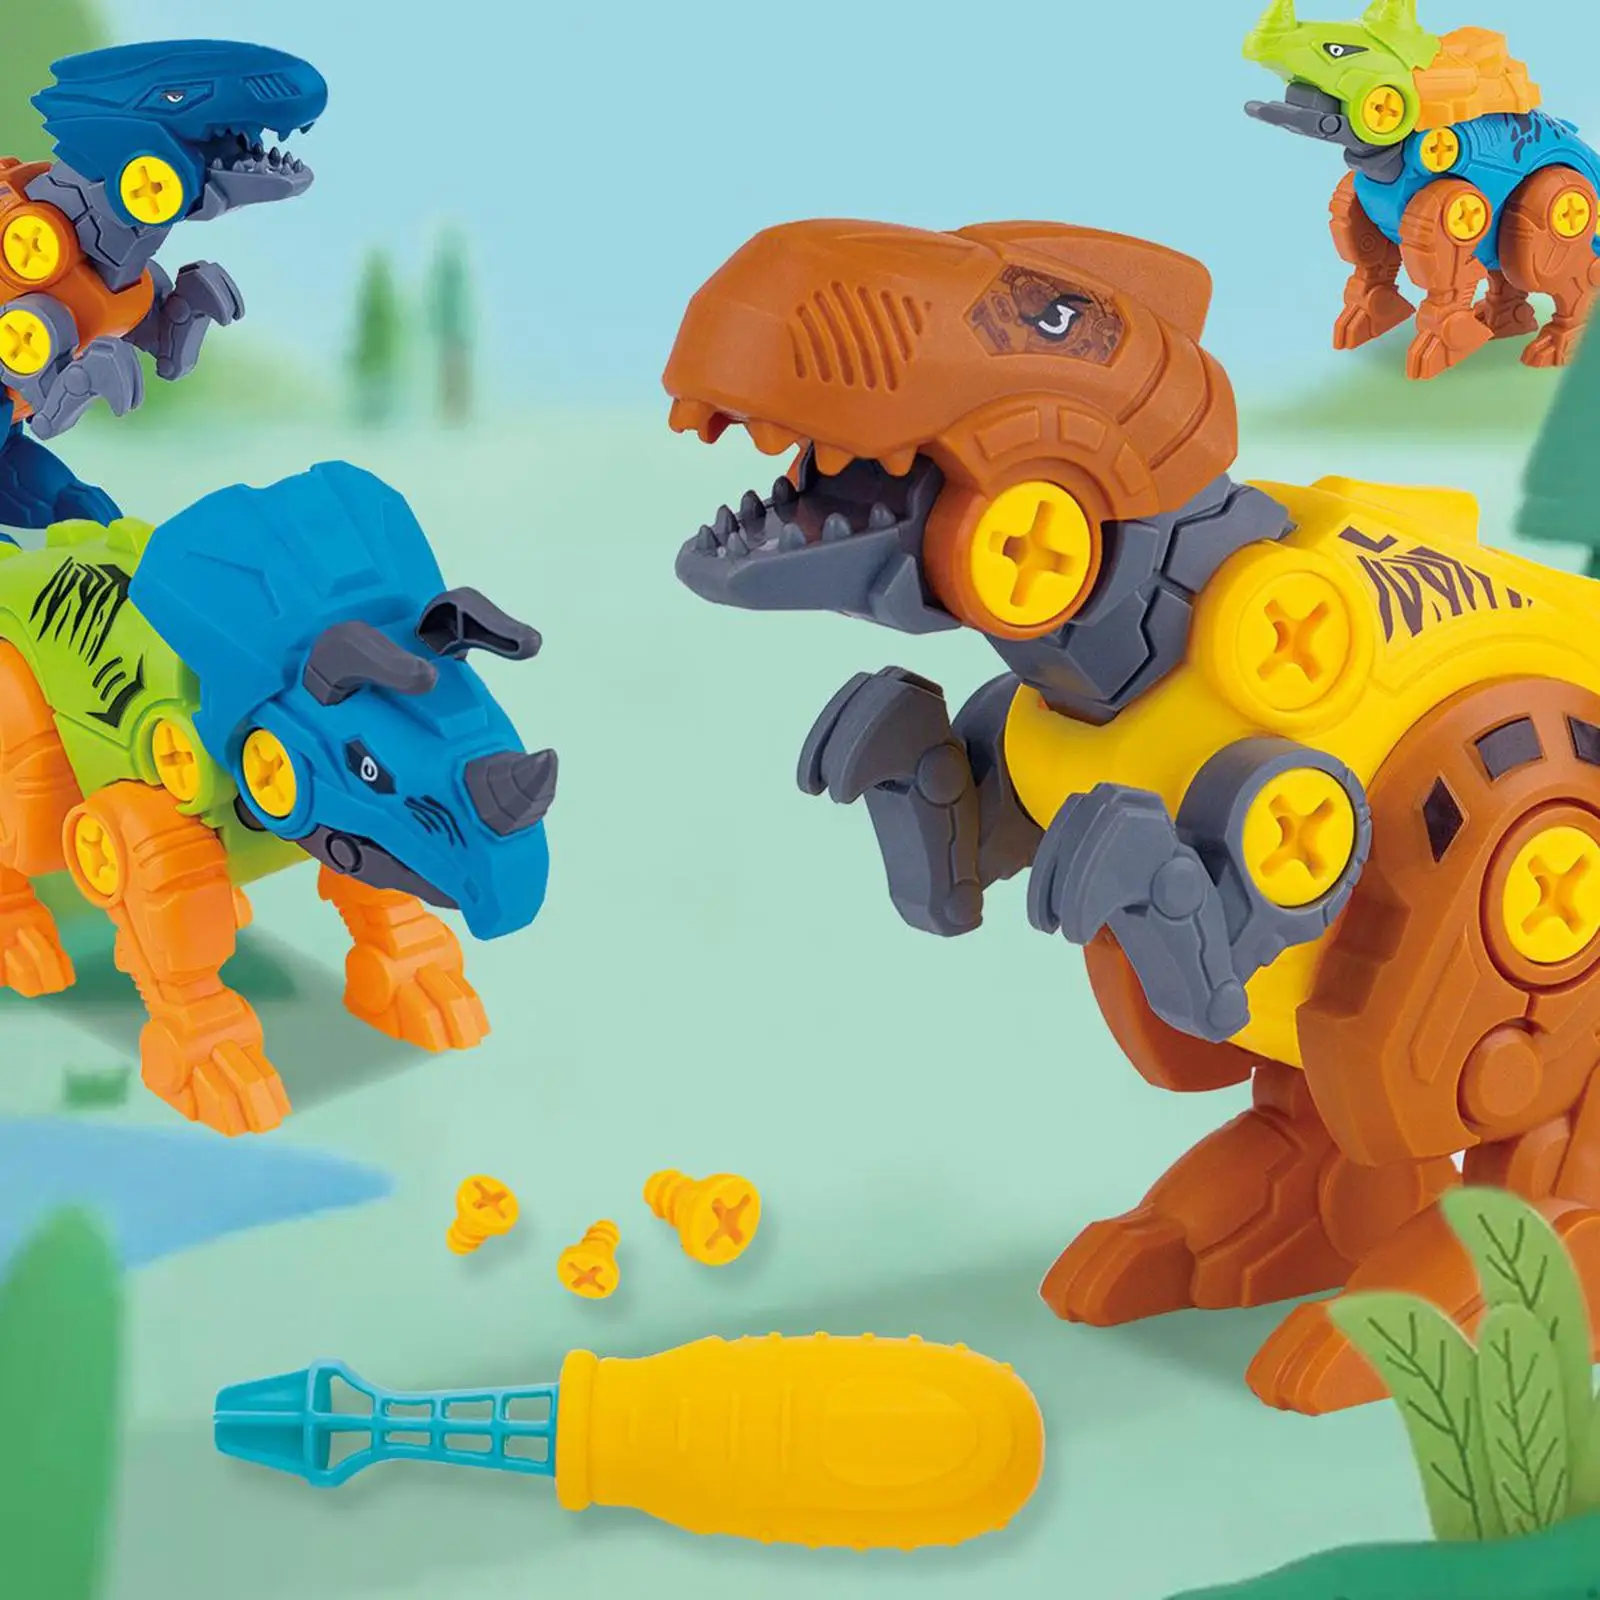 Dinosaur Building Blocks Figures Home Decor Ornaments for 4 5 6 Years Old